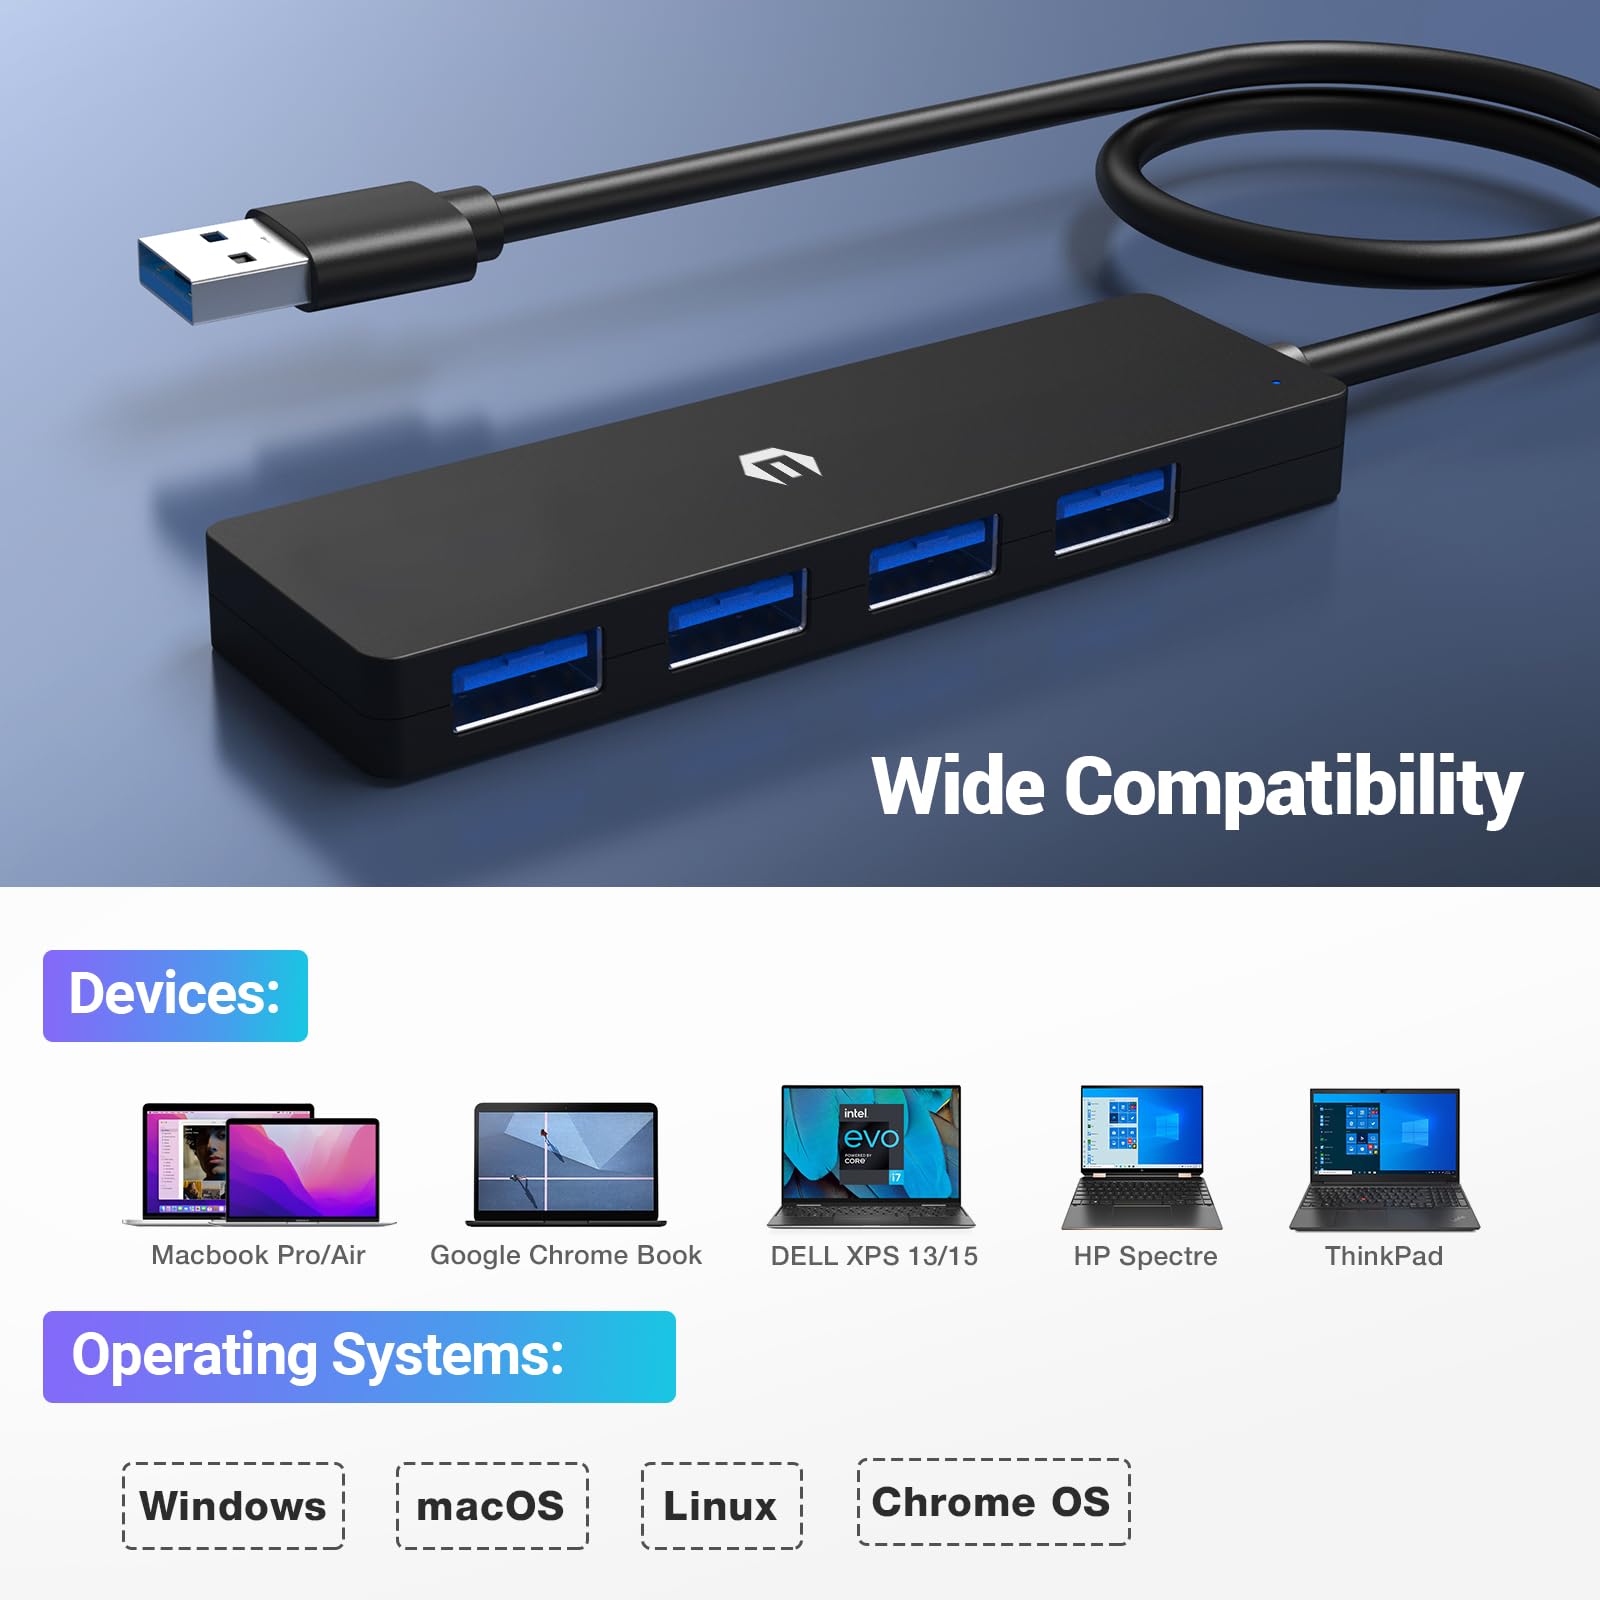 4 Port USB Hub, USB 3.0 Hub with Blazing 5Gbps Transmission, Expand Laptop, Flash Drive, Hard Drive, Console, Printer, Camera, Keyboard, and Mouse Connectivity